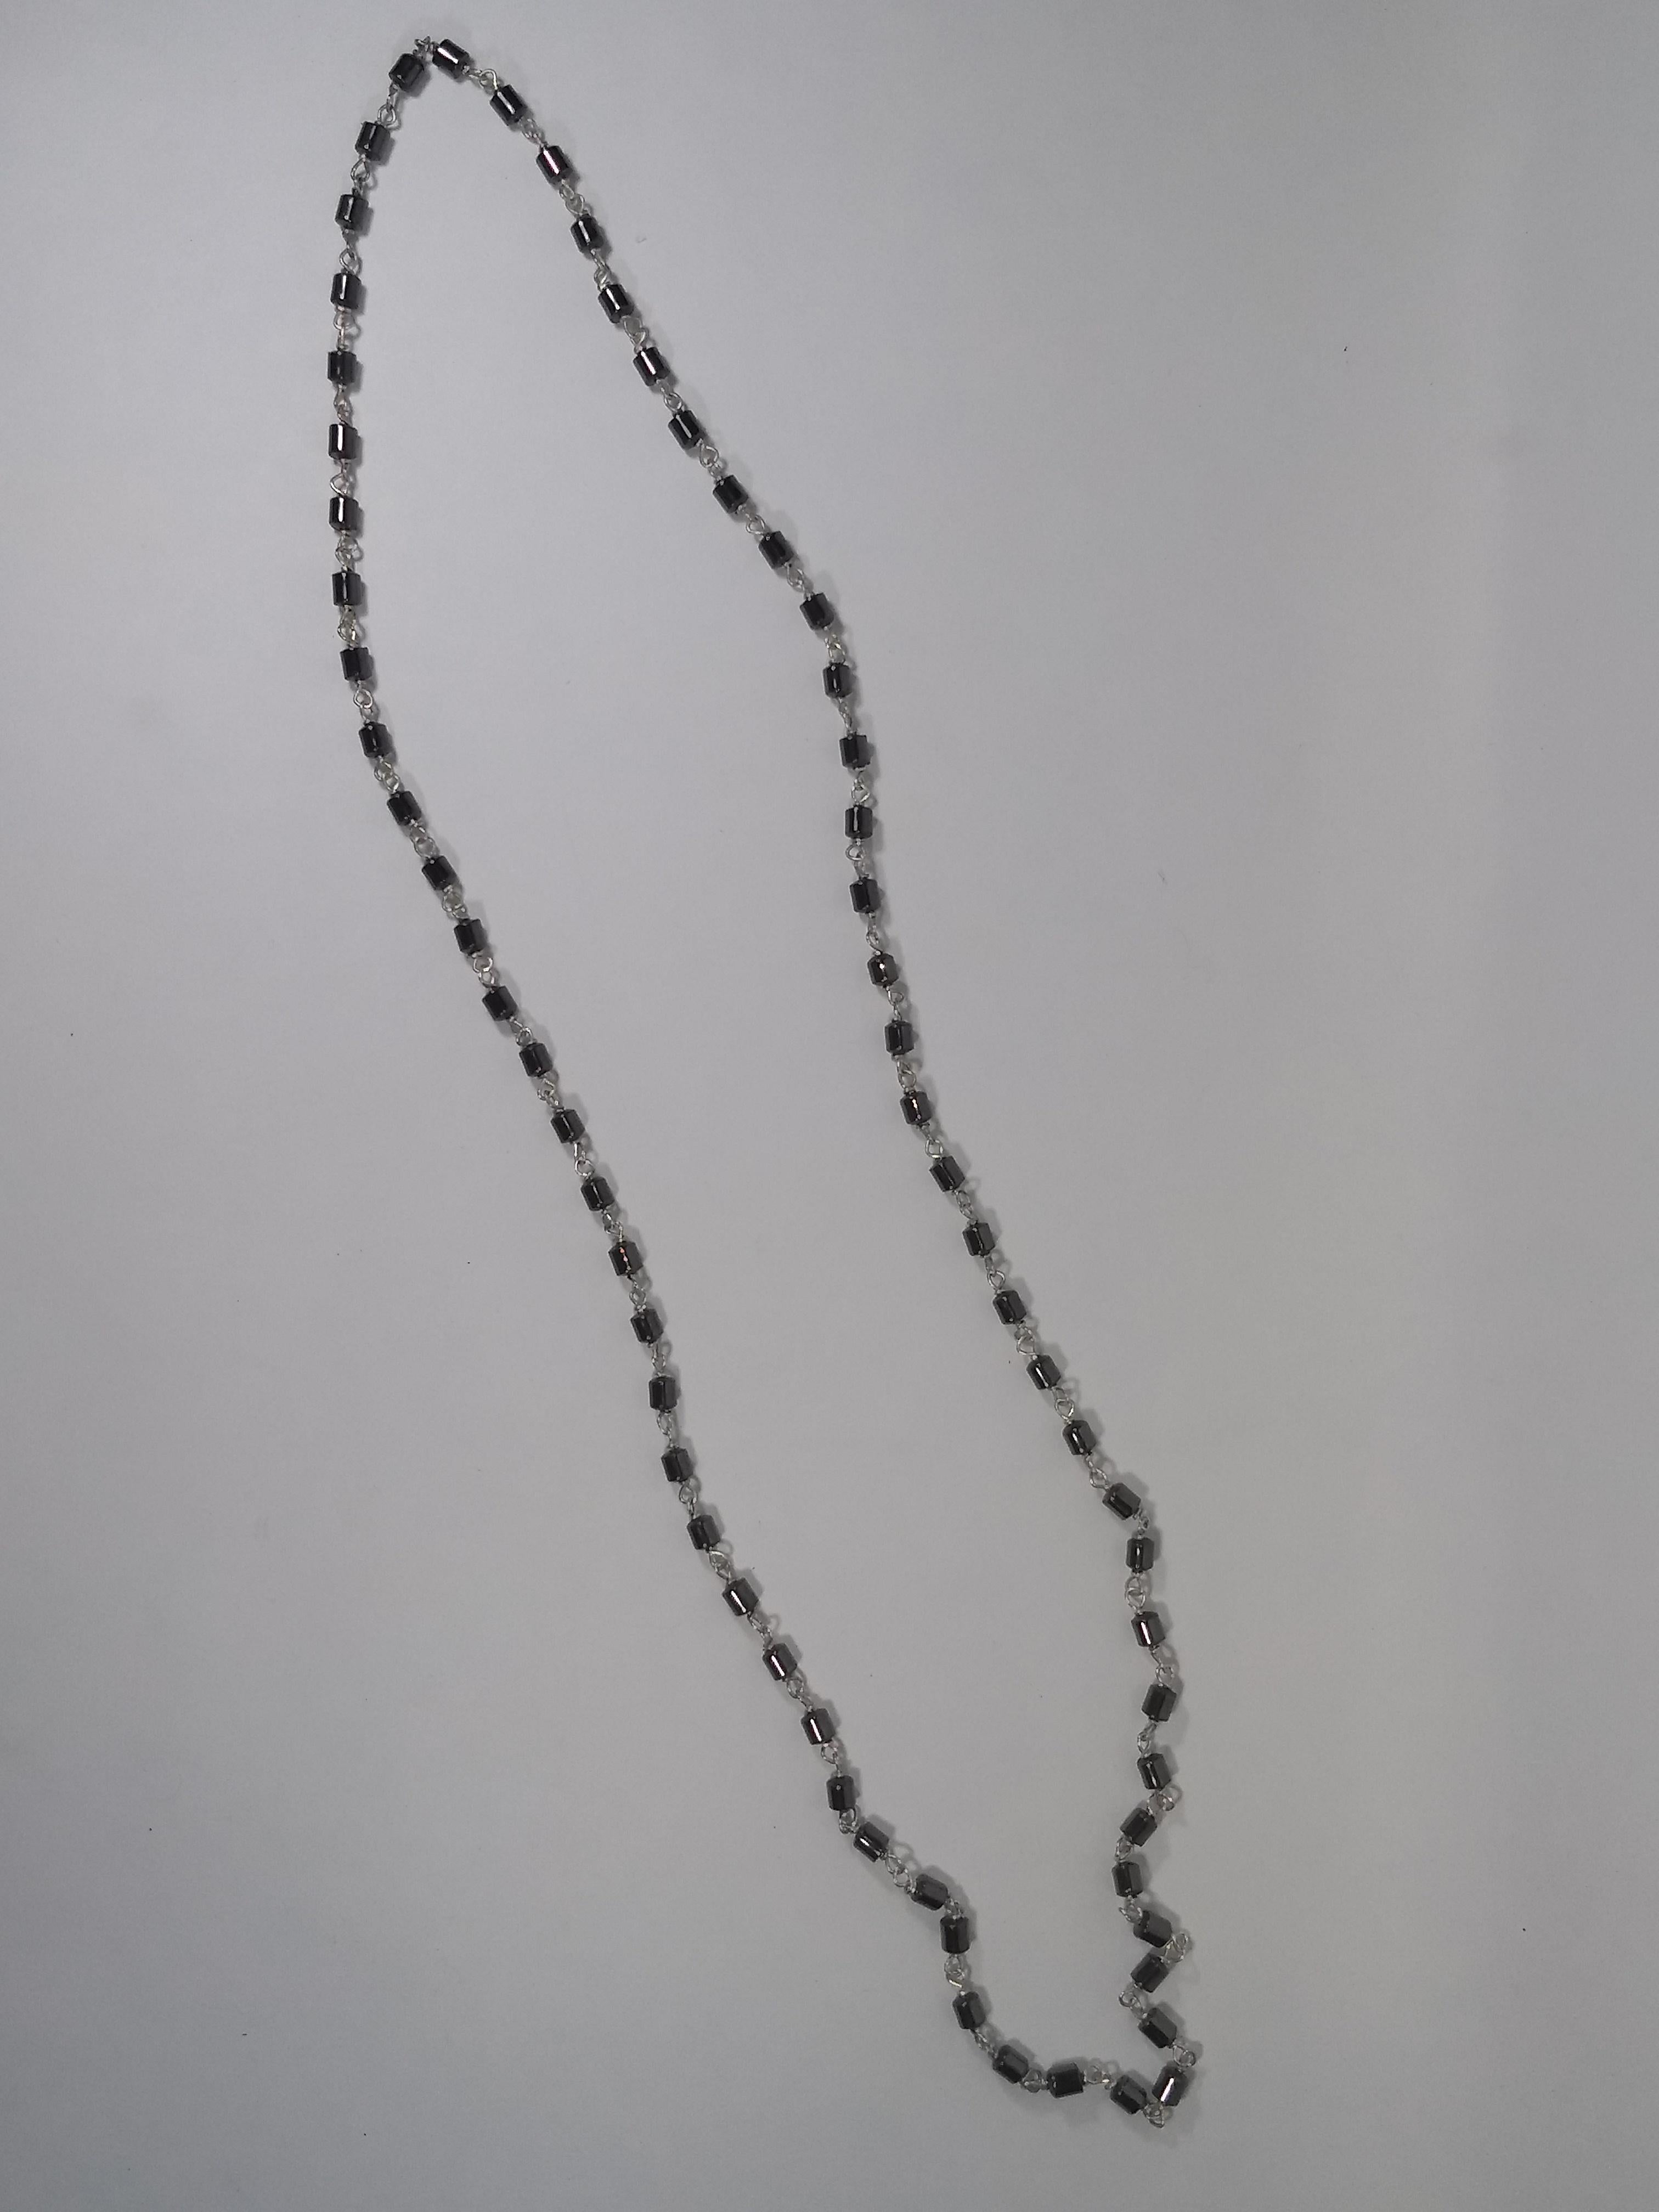 This Alberto Juan one of a kind necklace was handmade from hematite beads and sterling silver. Necklace measures 27